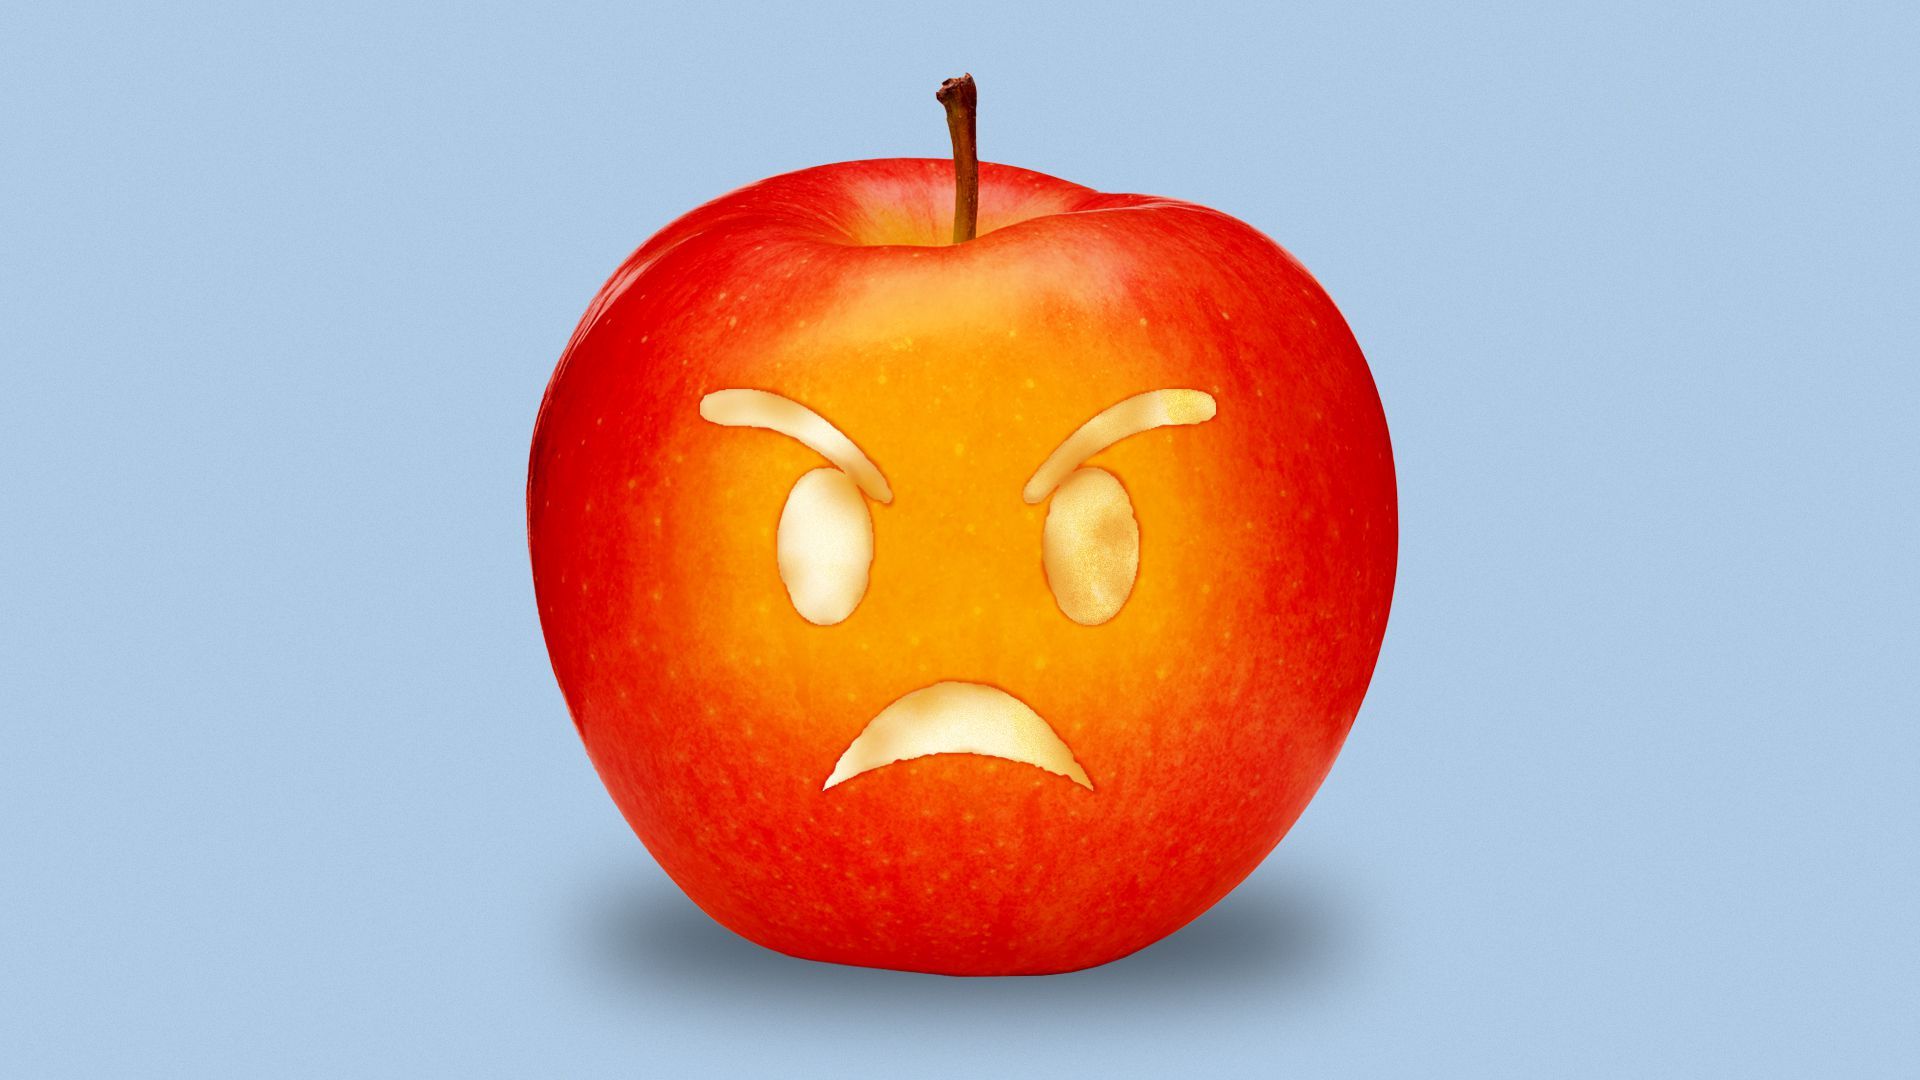 Illustration of an apple looking like an angry face emoji